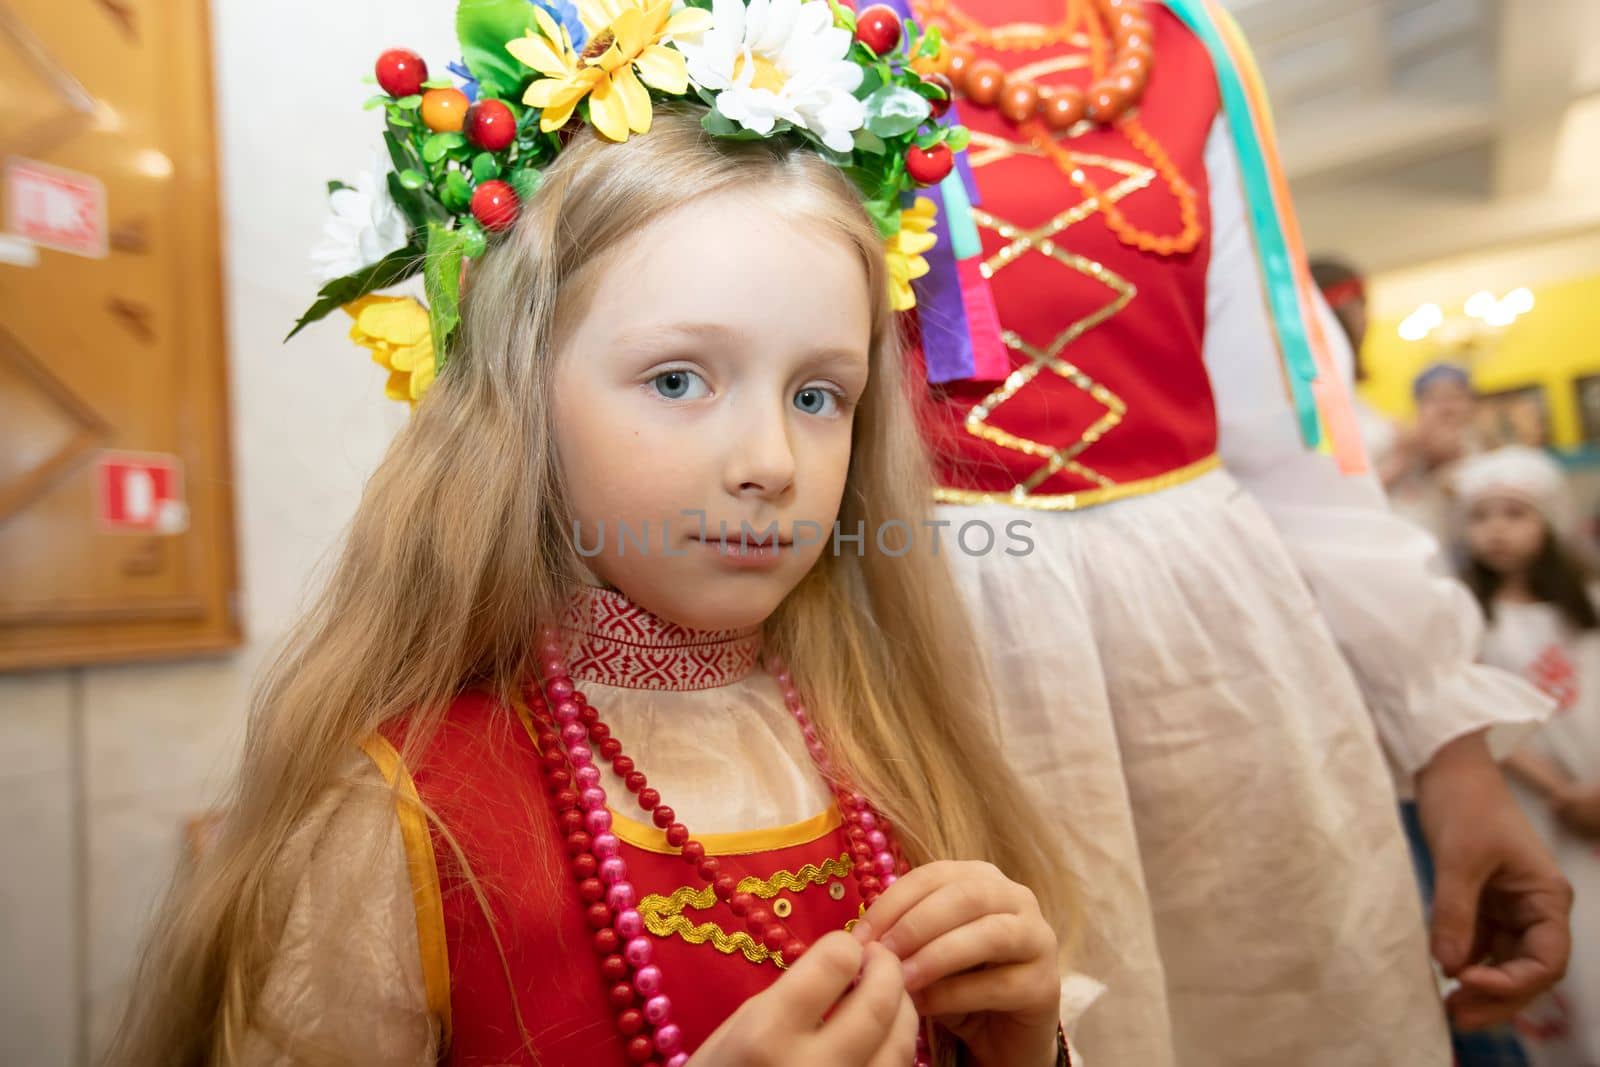 Belarus, the city of Gomil, May 21, 2021. Children's holiday. Ukrainian or Belarusian little girl in national costume. by Sviatlana